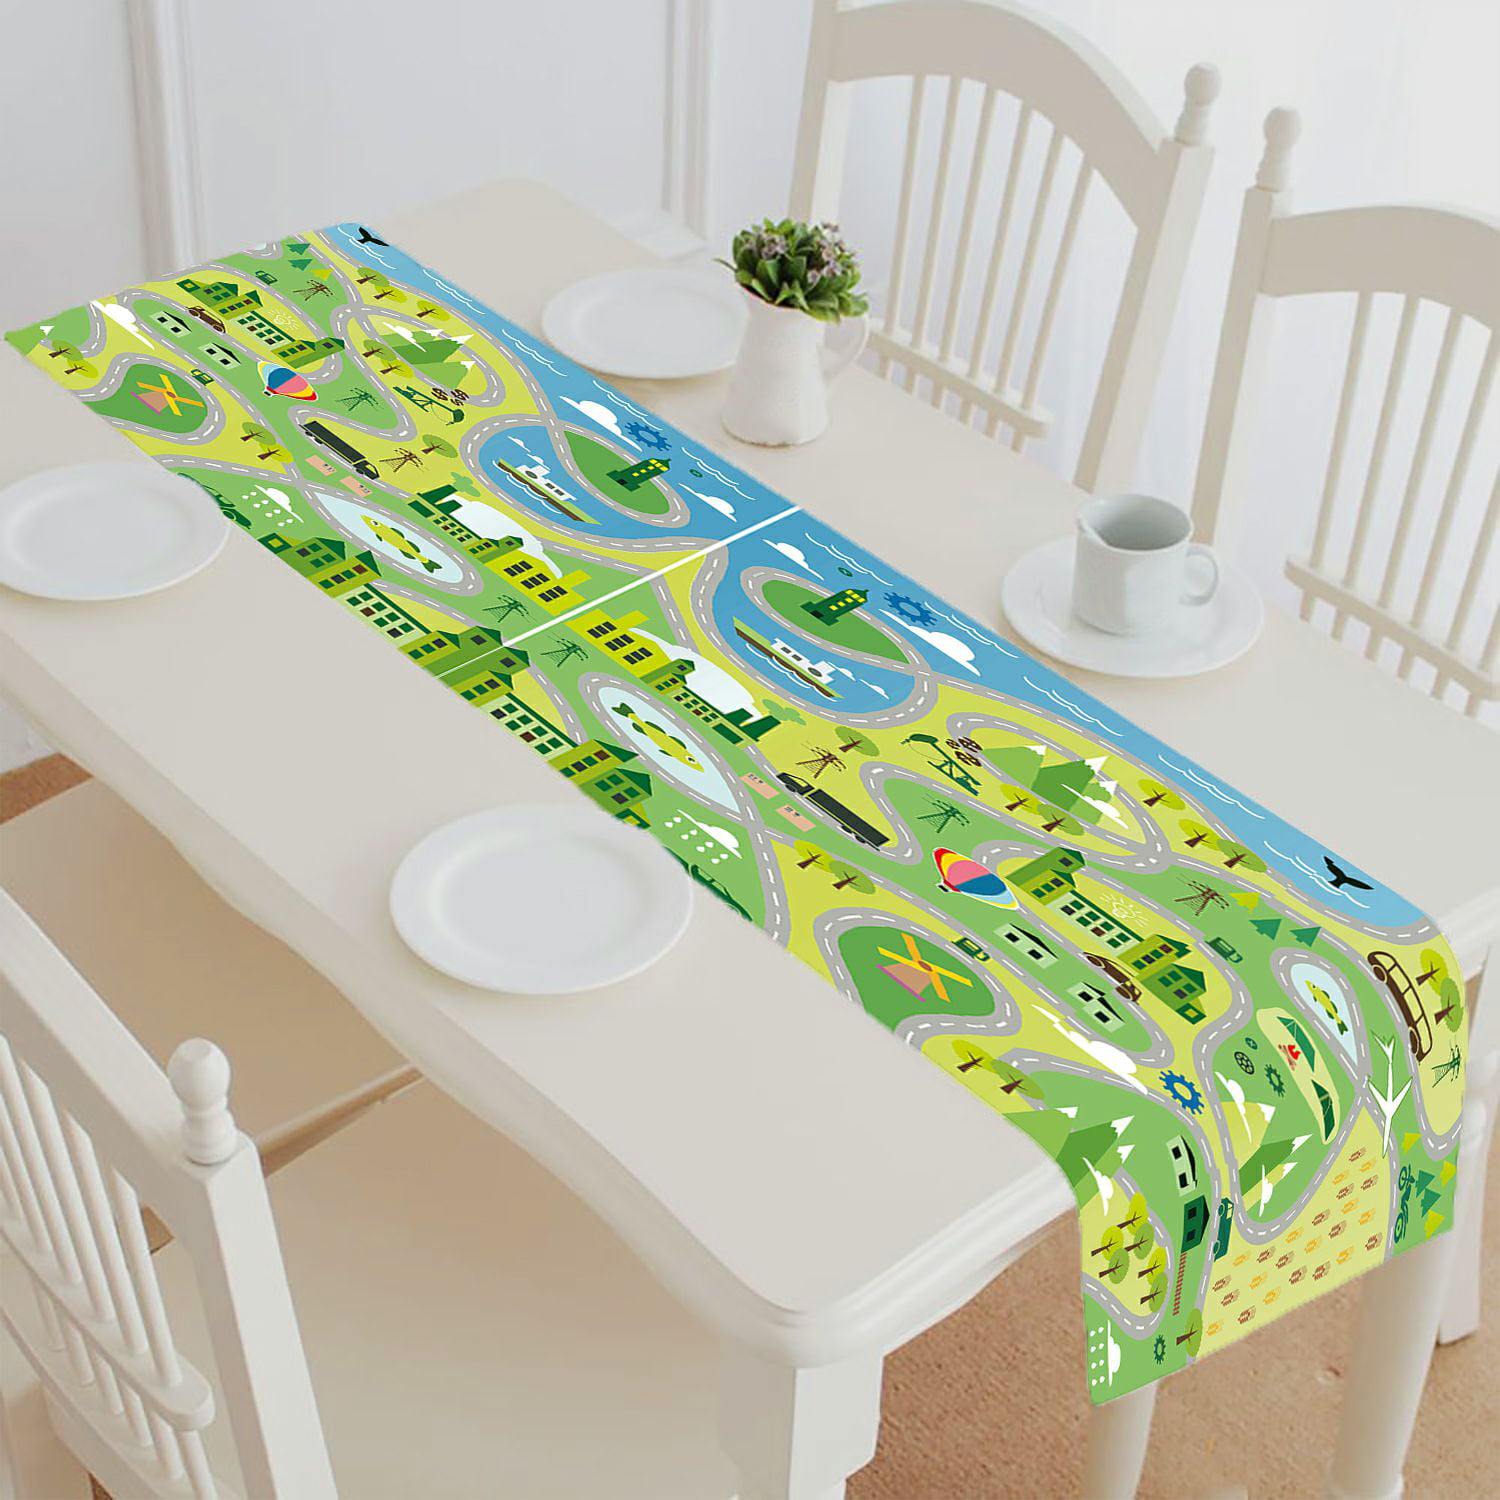 Green Plaid Rectangle Table Runner,Table Decorations Suitable for Parties,Holiday and Other Occasions Size 18X72in Double-Sided Printing Geat-Resistant and Wrinkle-Resistant